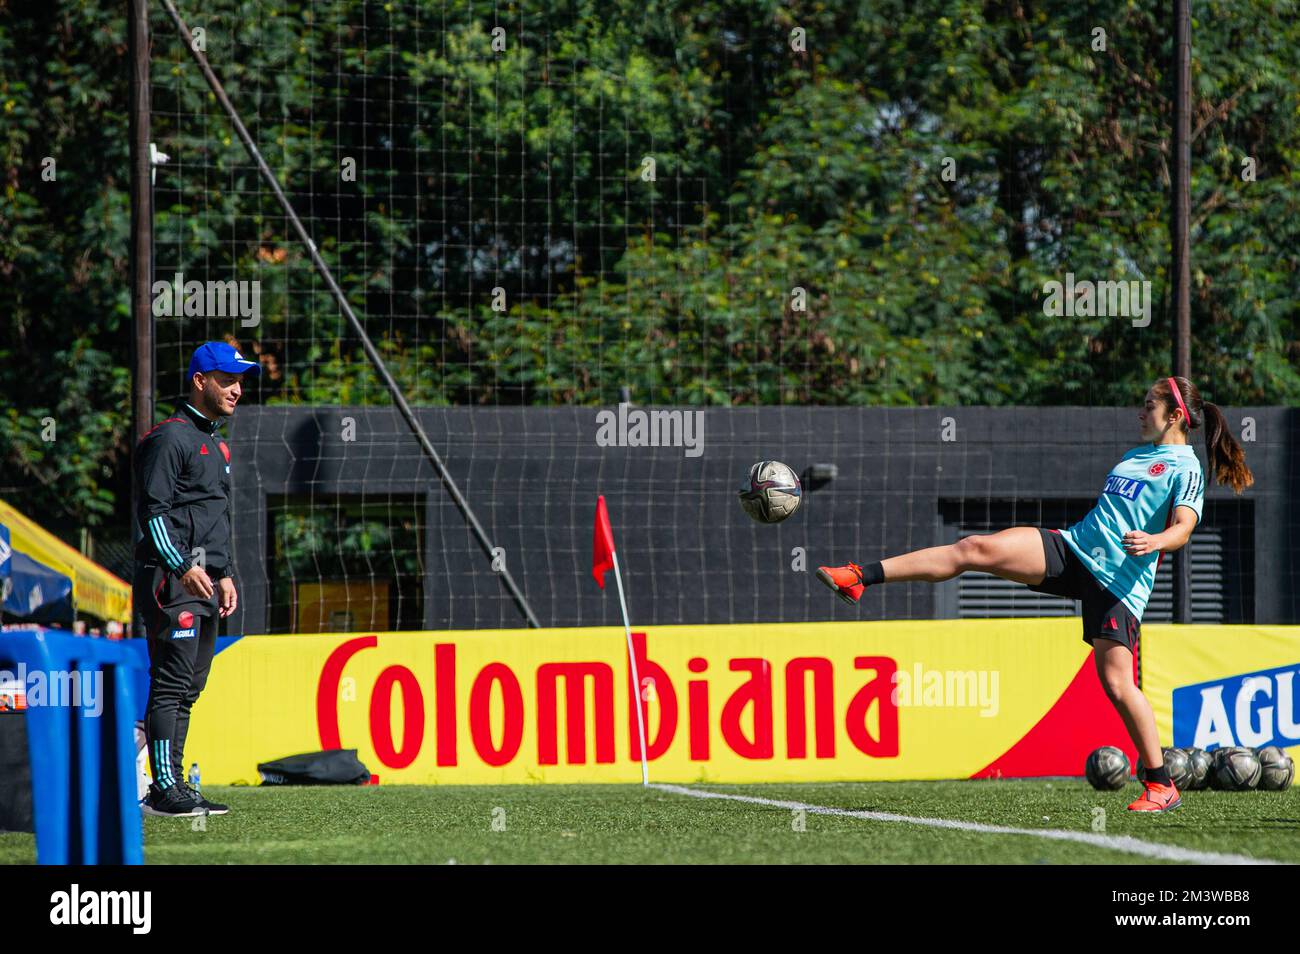 Carolina Arbelaez warms up during Colombia's womens team preparations in Bogota, Colombia for the 2023 Australia's Womens World Cup, december 15, 2022. Photo by: S. Barros/Long Visual Press Stock Photo